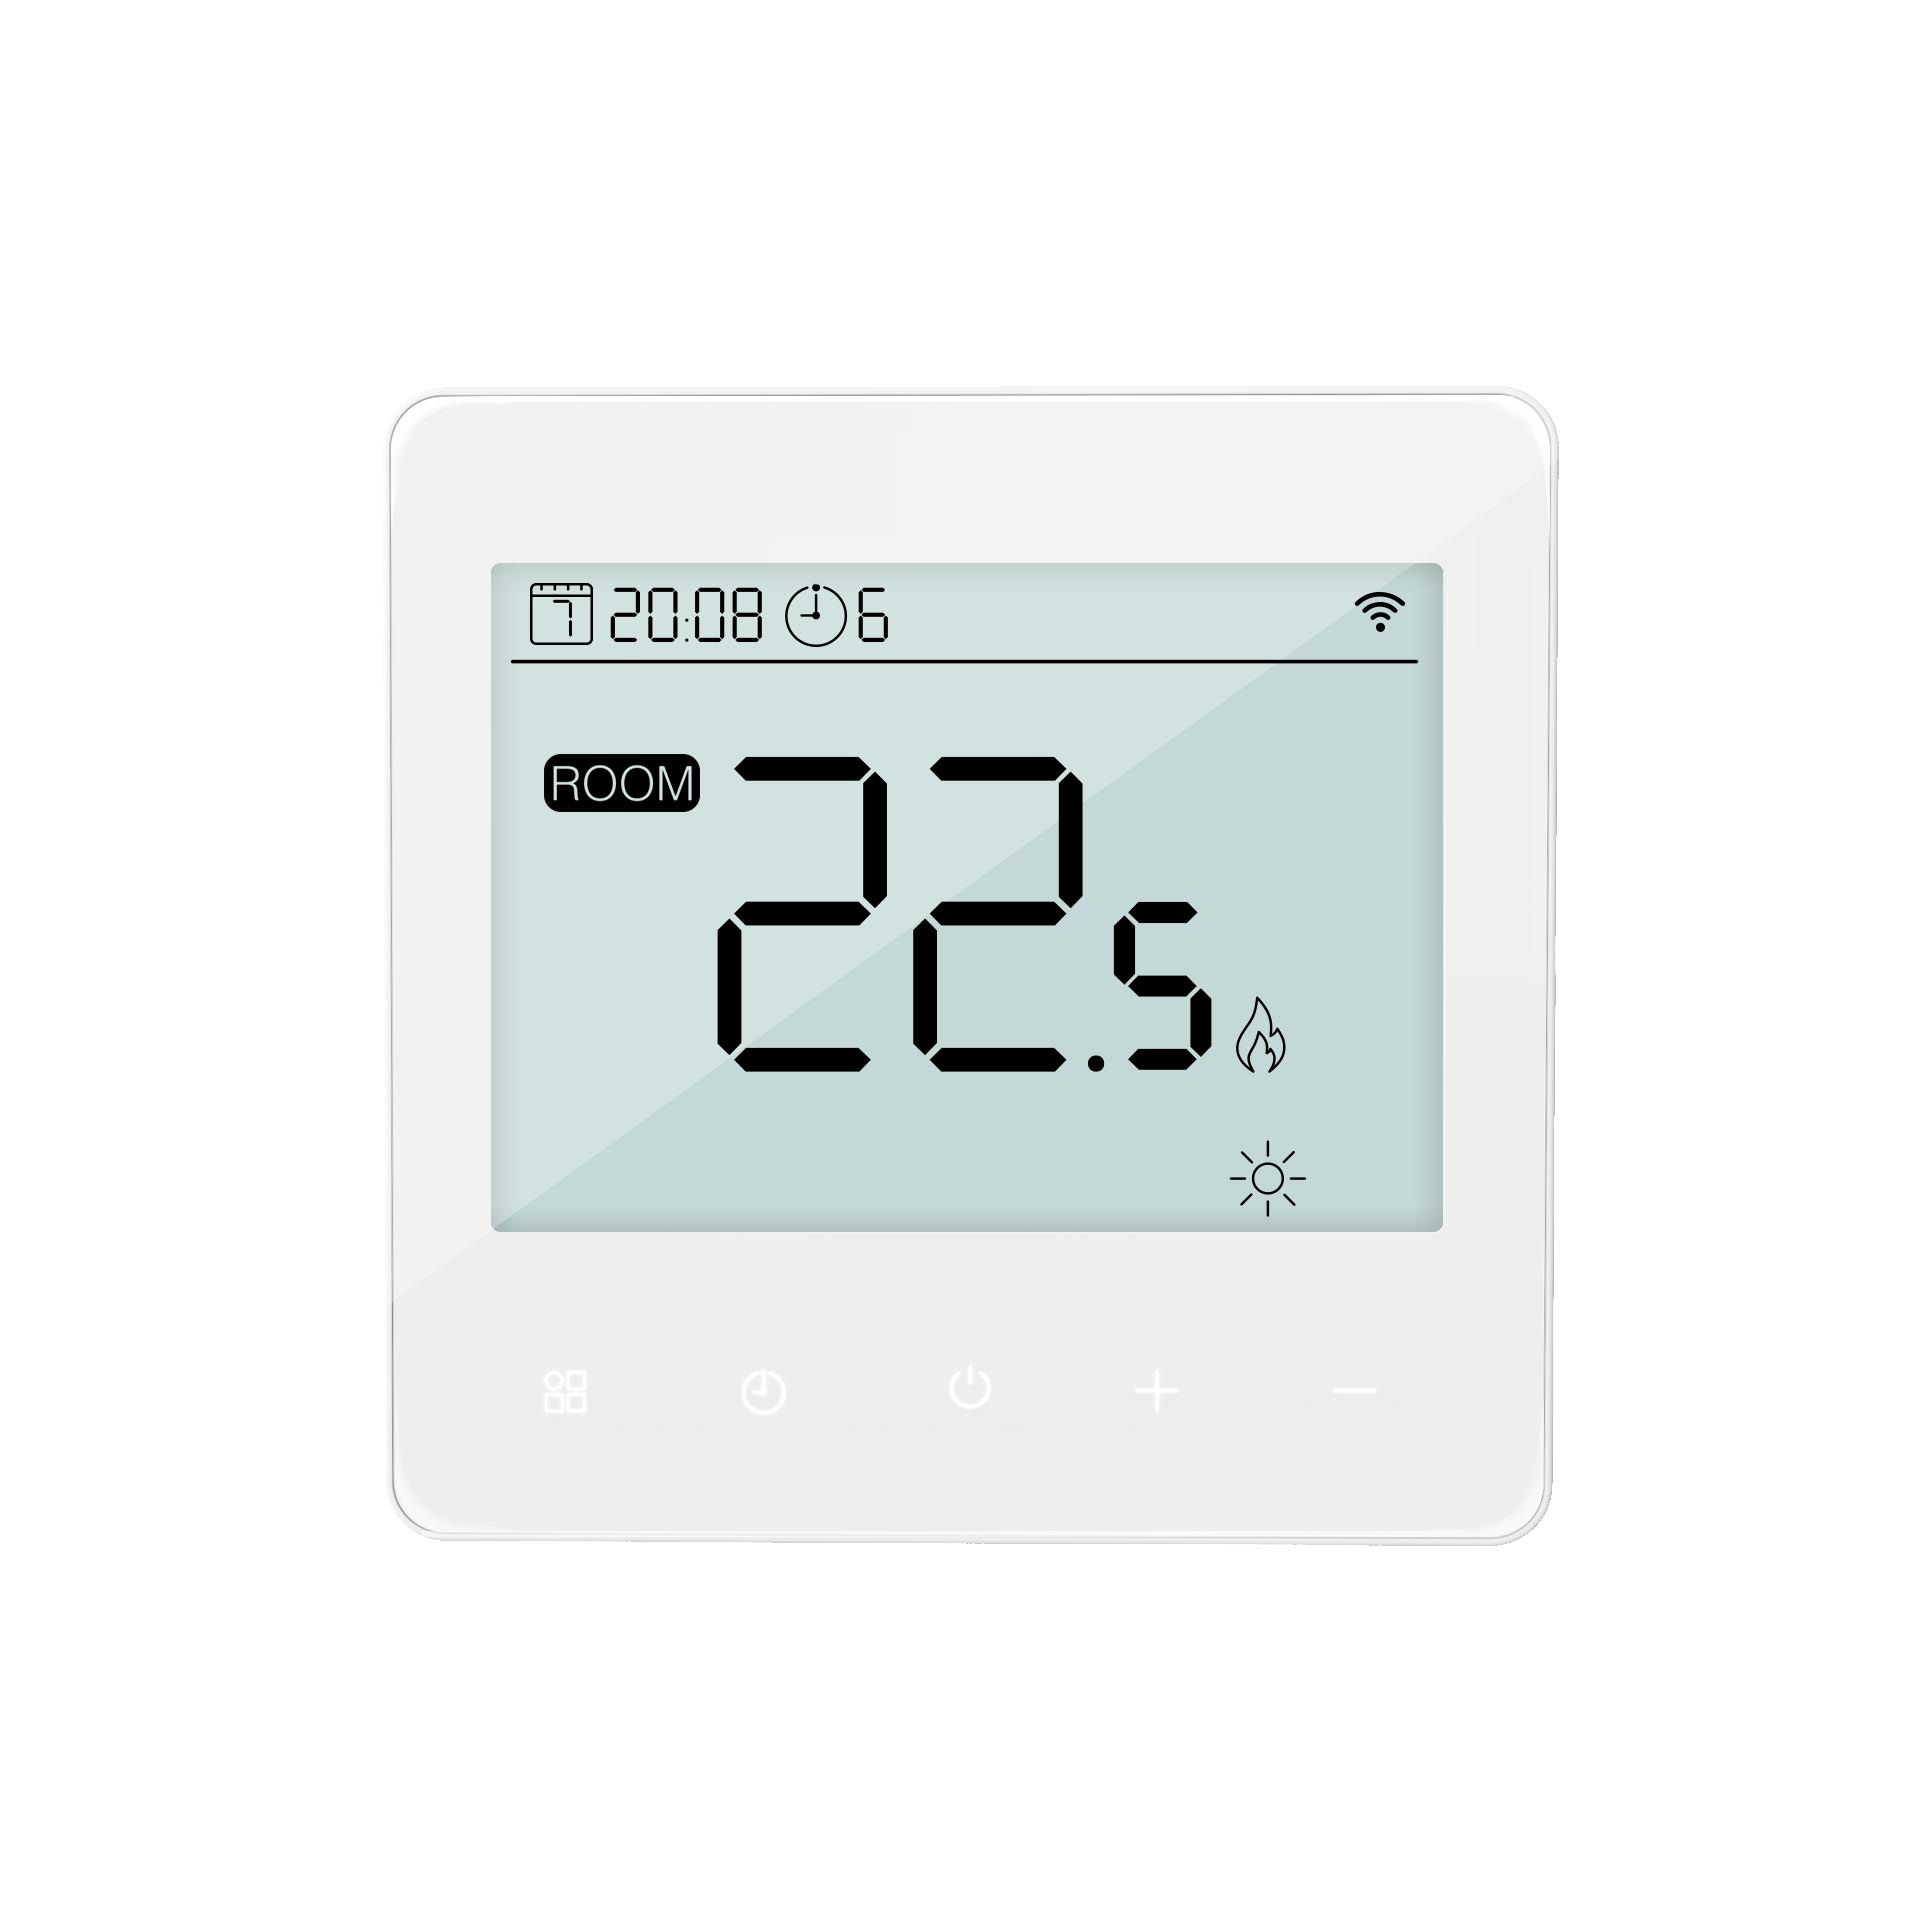 RS485 Modbus Smart Thermostat for fan coil, valve, heat pump or gas boiler control